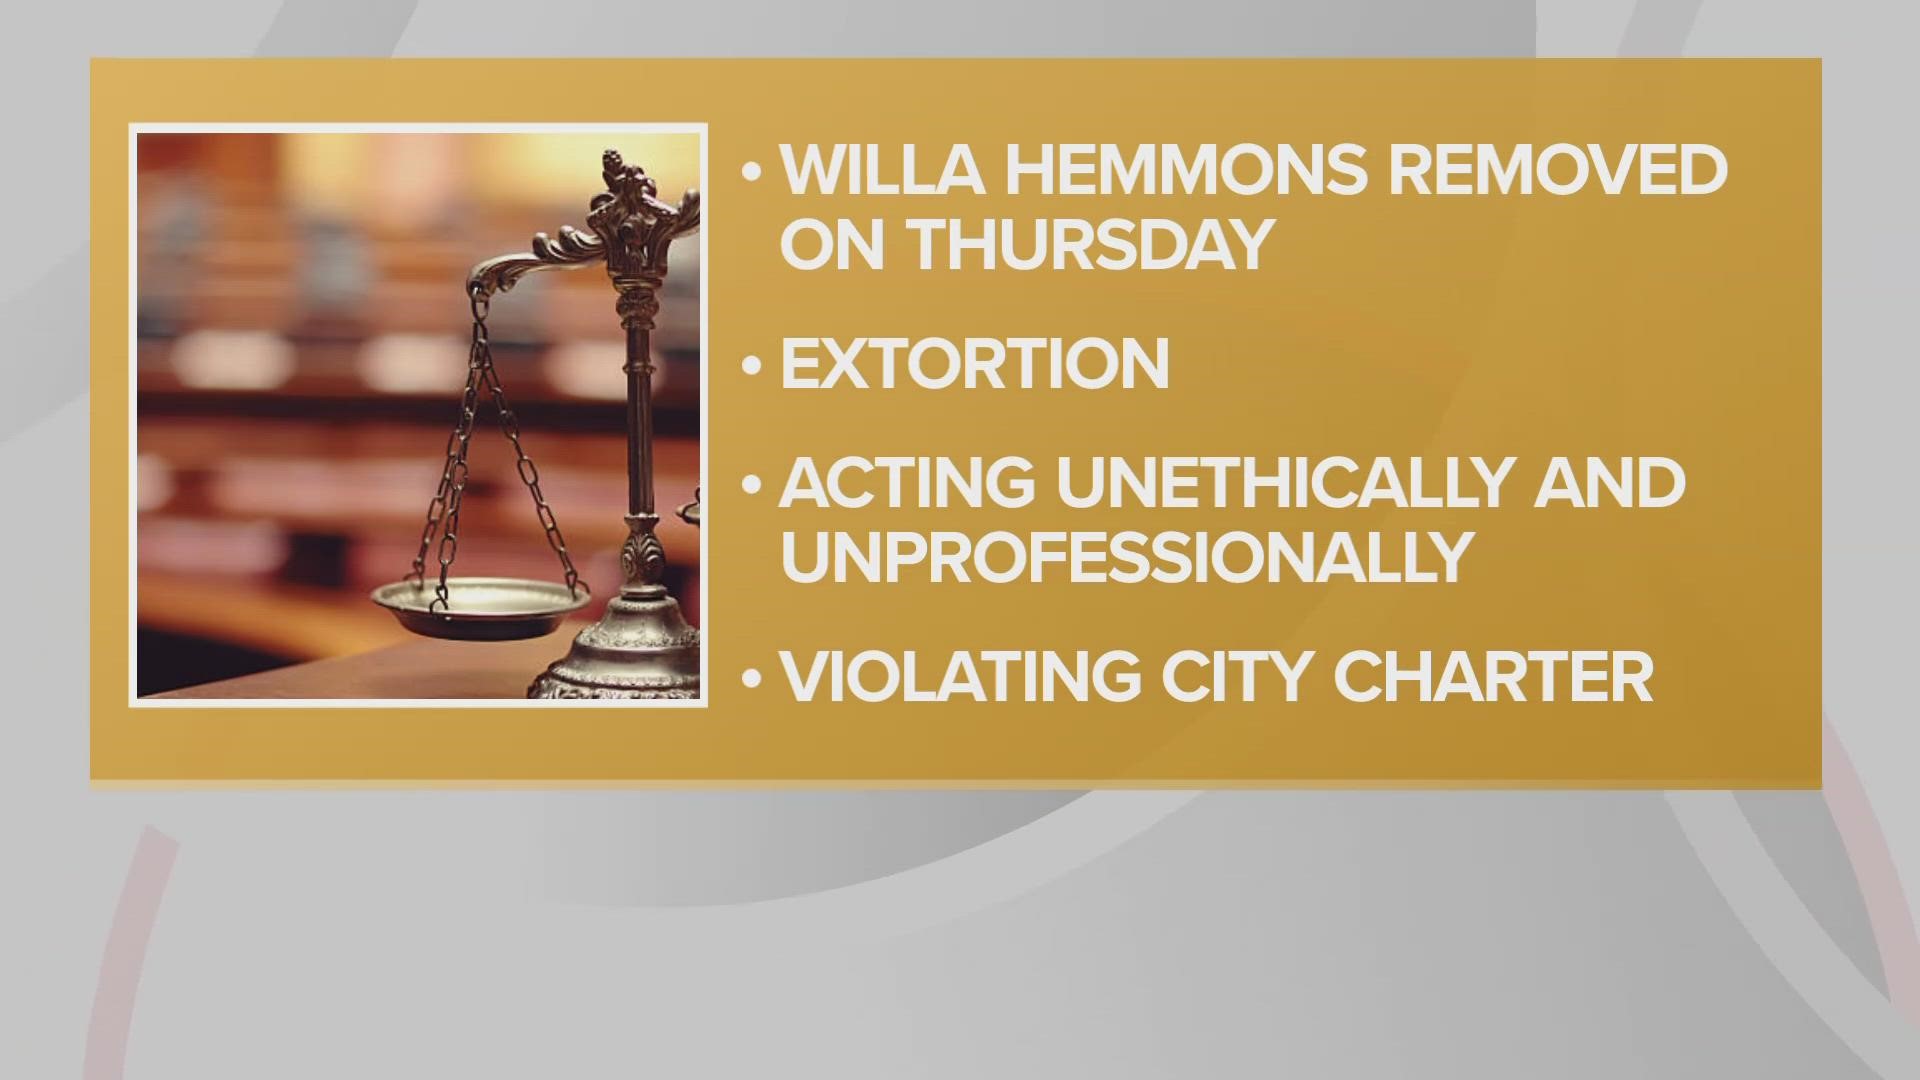 East Cleveland City Council voted to remove law director Willa Hemmons on Thursday.